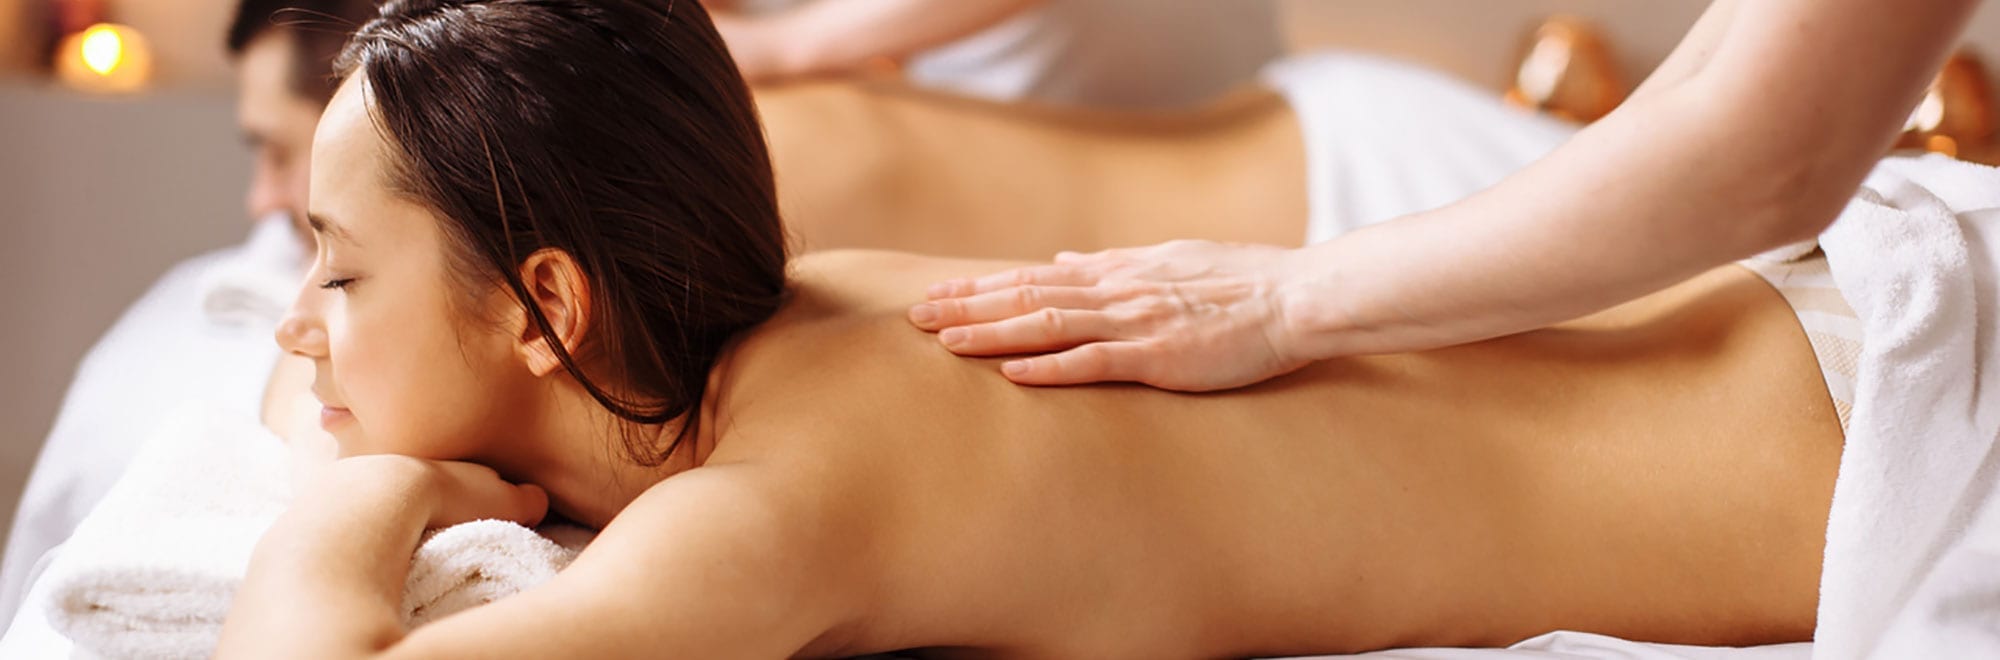 Clinical/Medical Neuromuscular “NMT” Massage Therapy